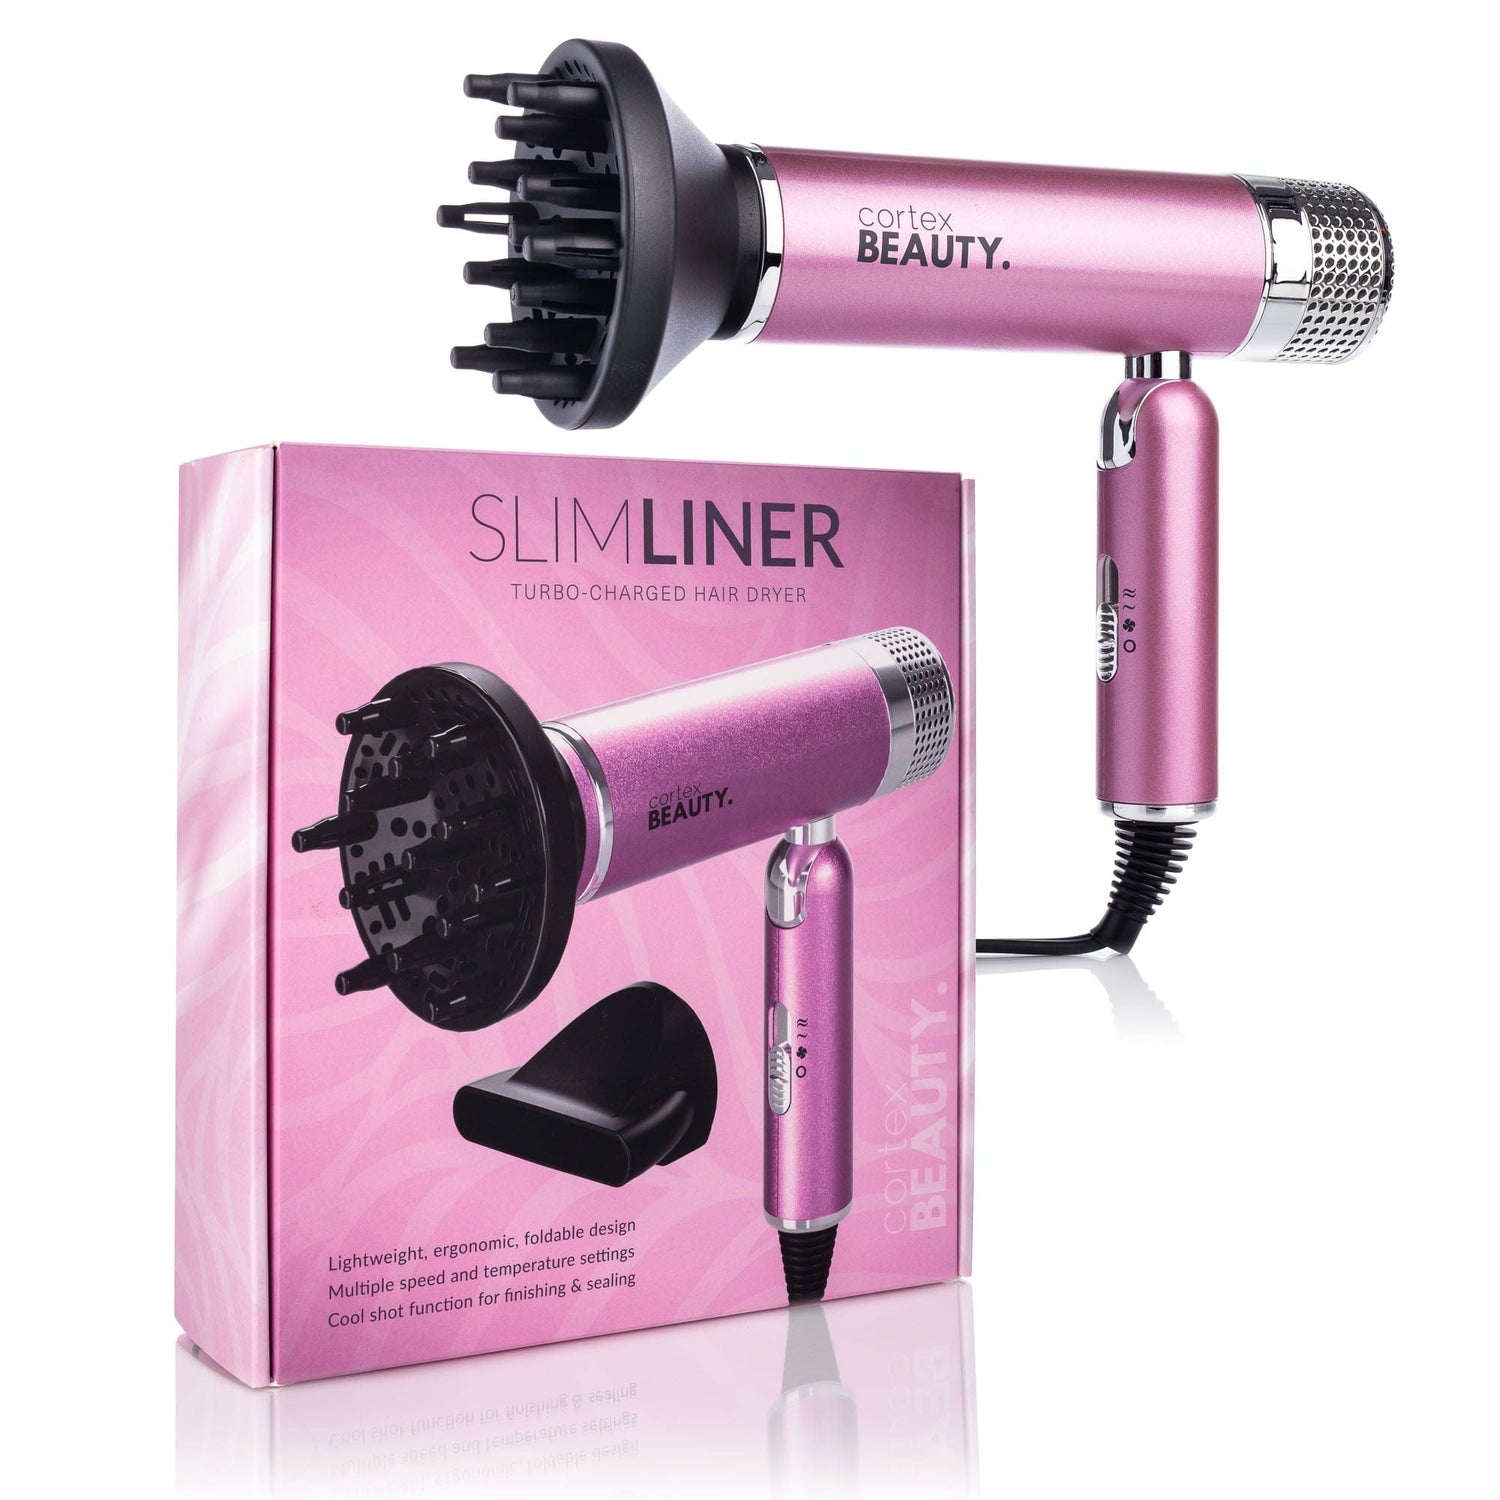 Cortex Beauty SlimLiner : Turbo-Charged Foldable Hair Dryer